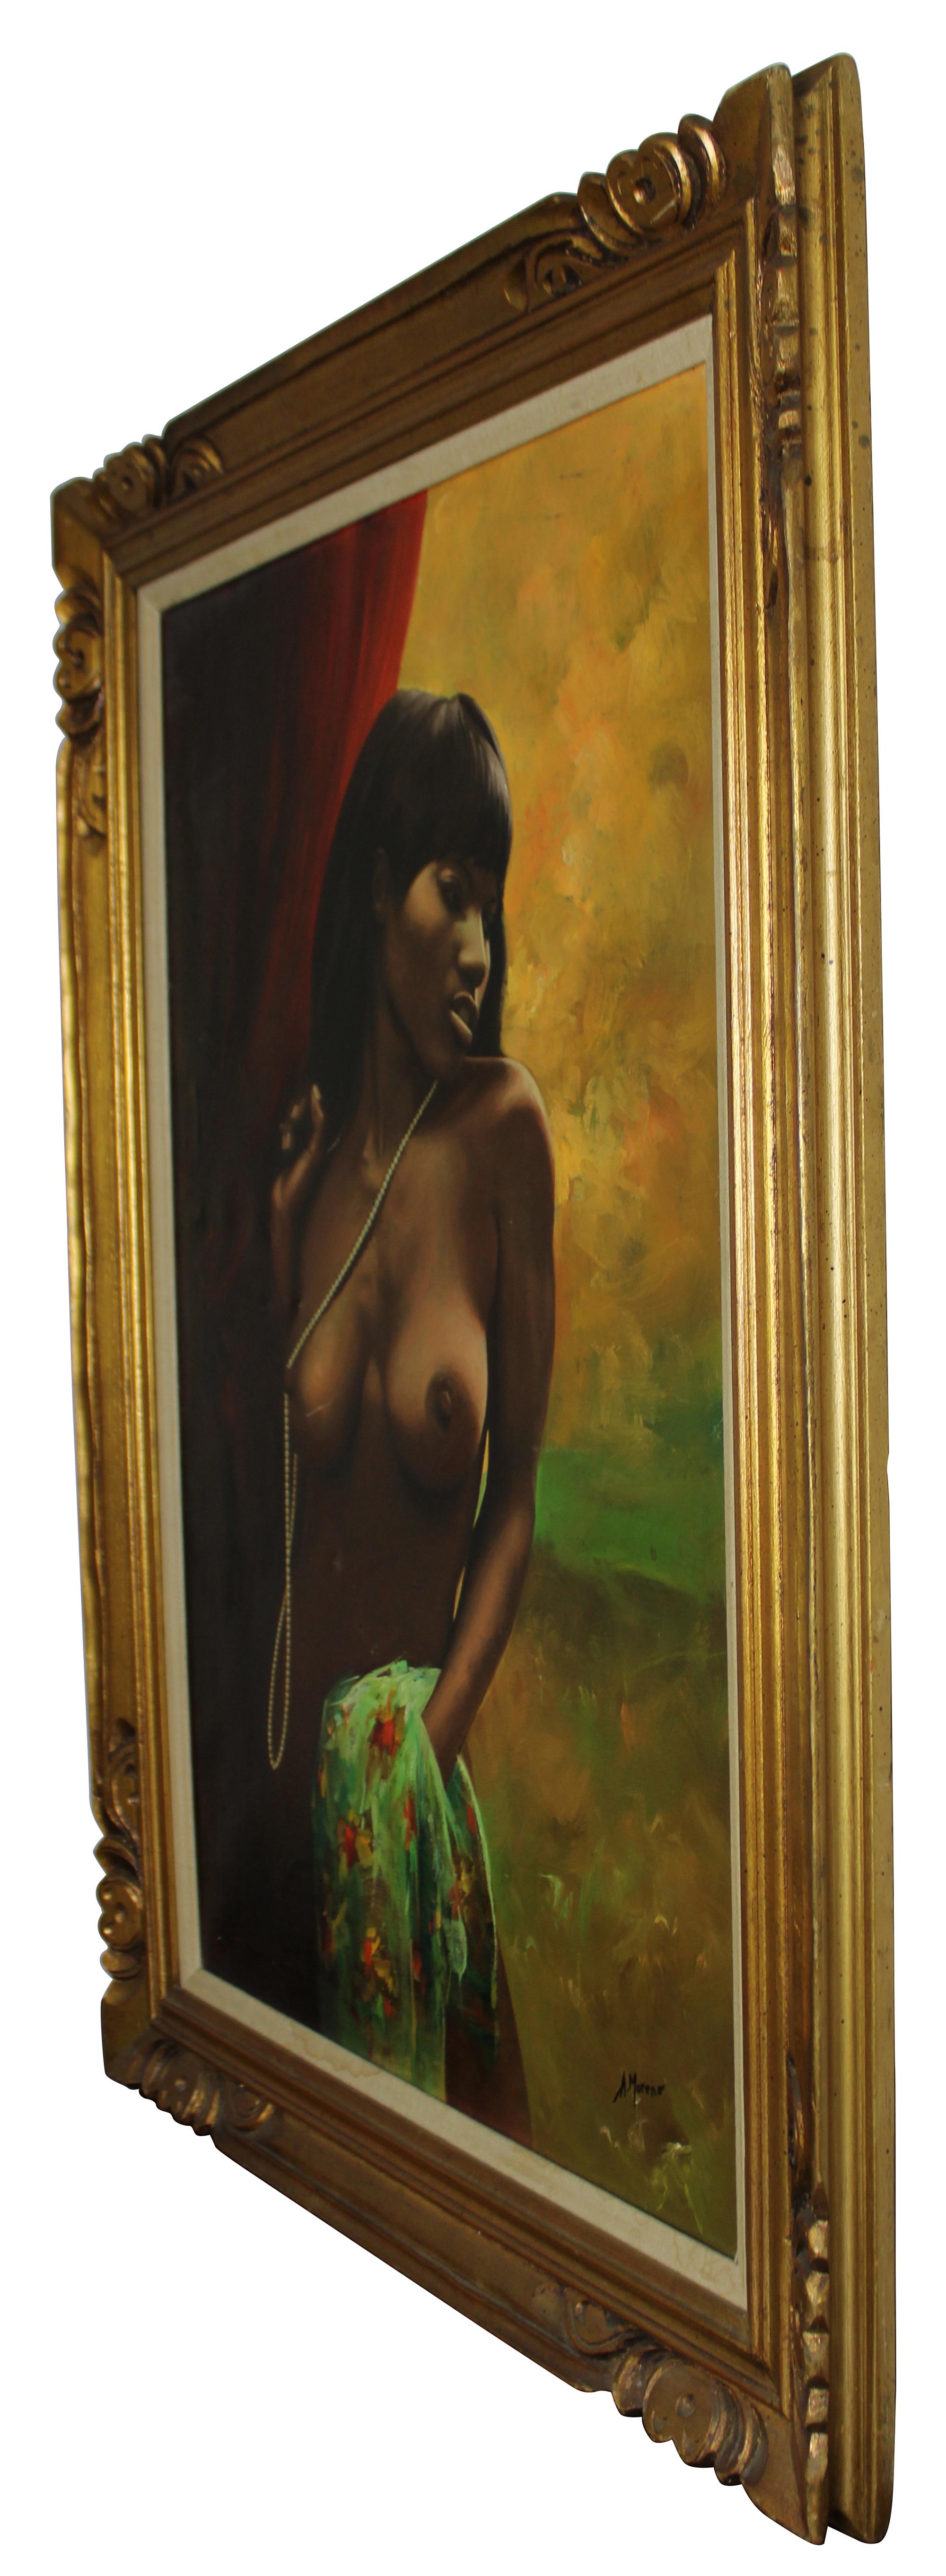 Vintage original oil painting by A. Moreno. Features a beautiful natural topless woman with a long string of pearls holding her sundress as she peers into the distance. Framed in gold, signed lower right.

Measures: Sans frame 24